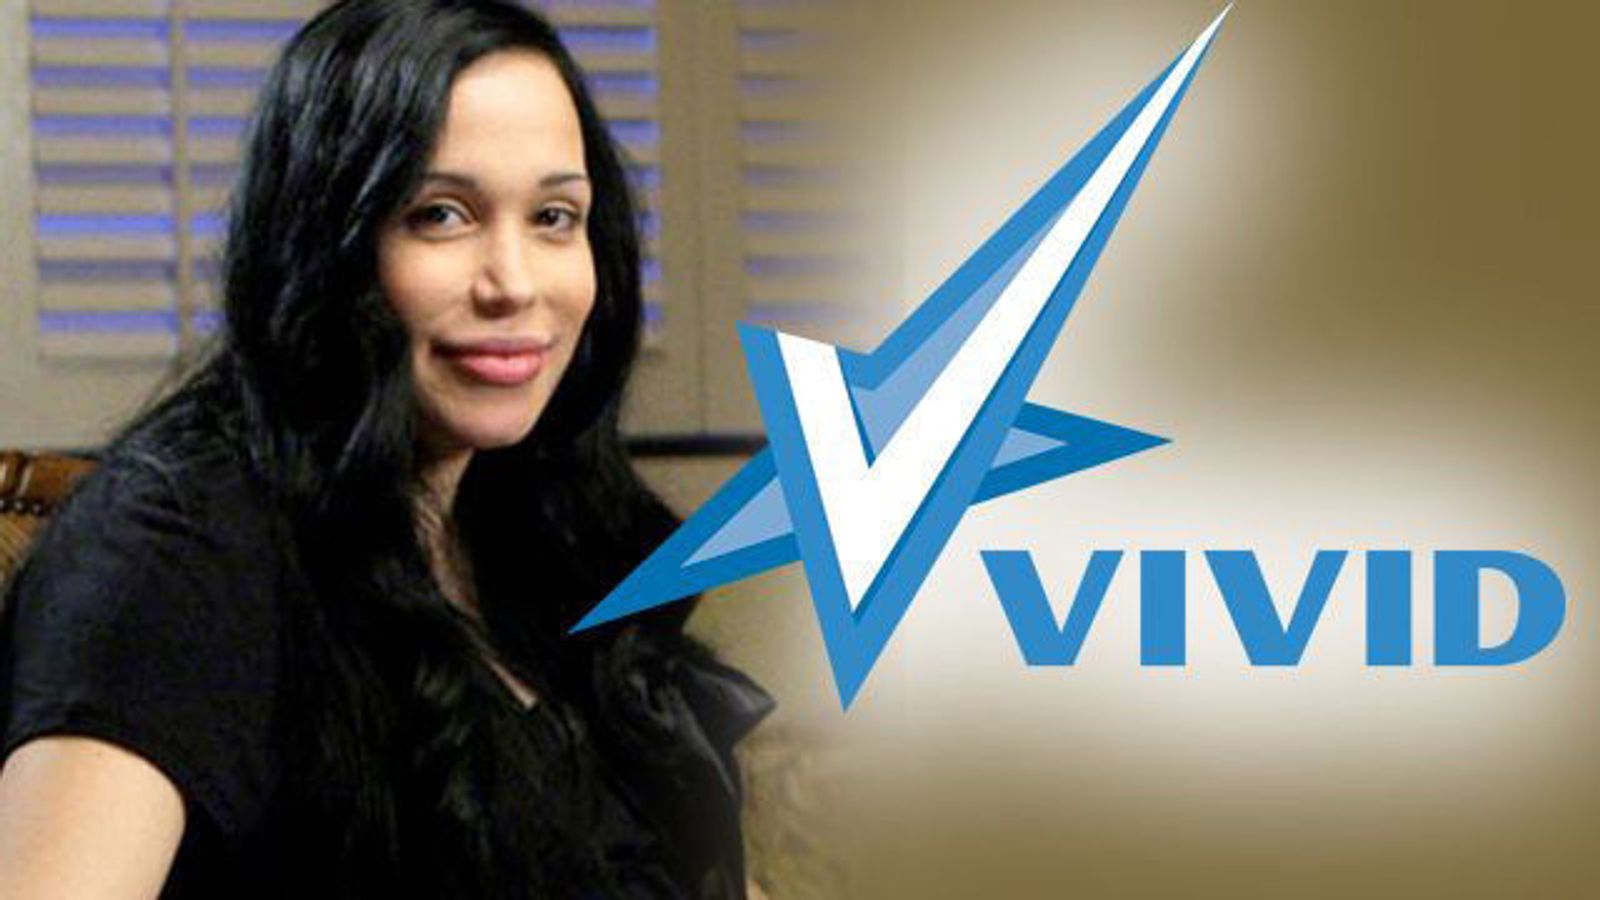 Octomom Baffles Vivid with Latest Offer Rejection